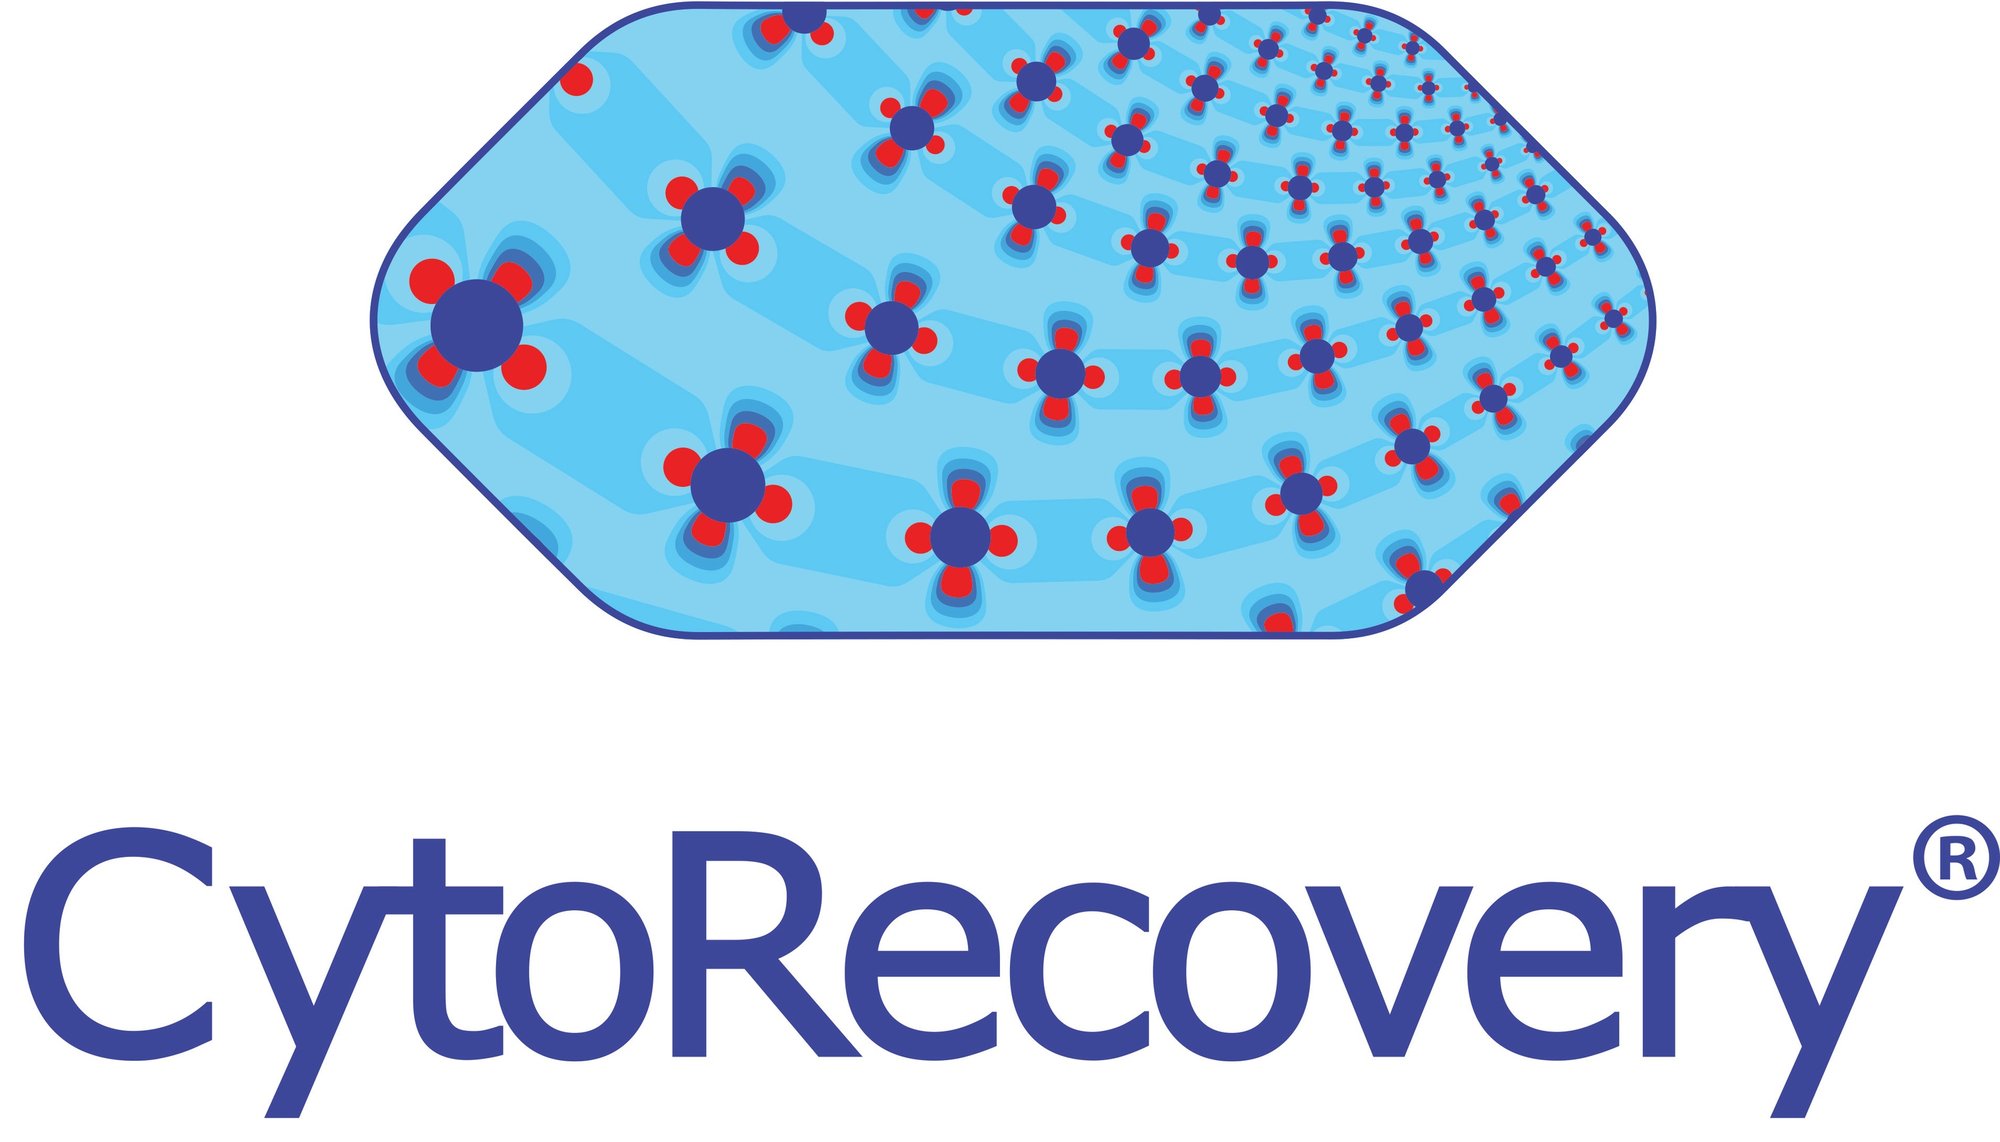 CytoRecovery